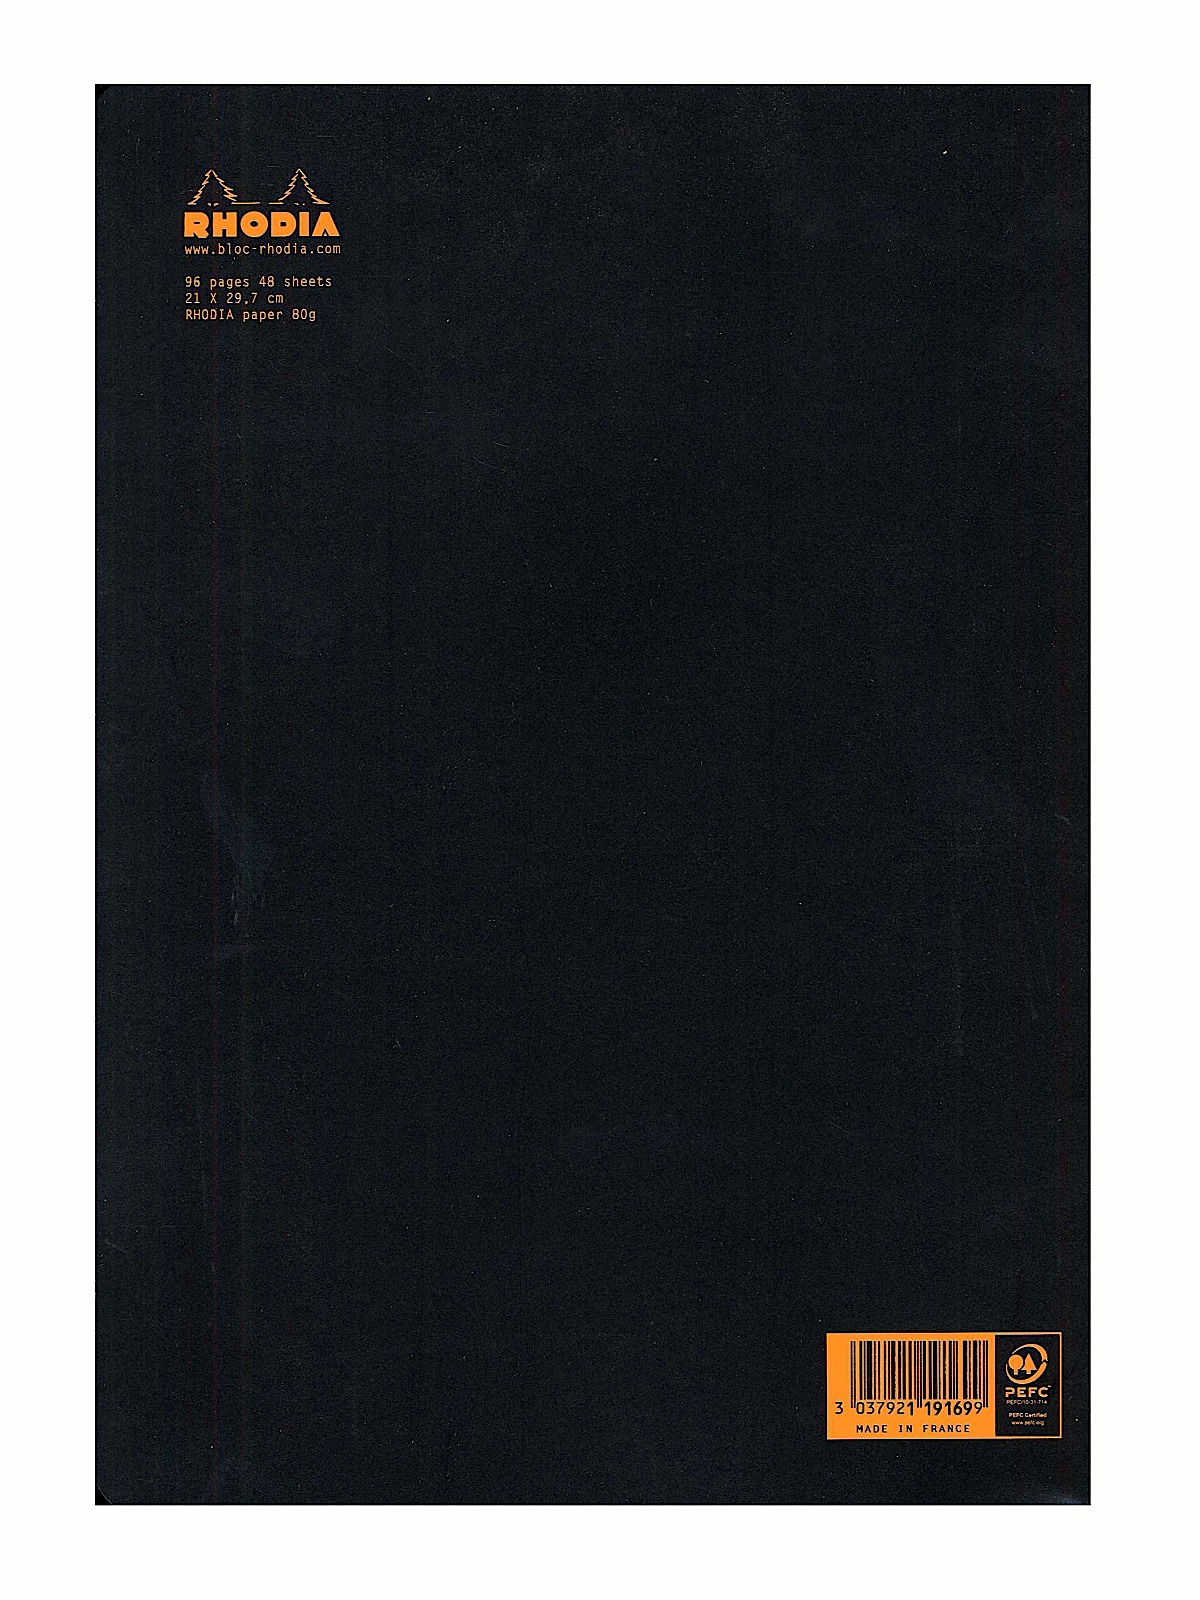 Staplebound Notebooks Ruled, Black Cover 8 1 4 In. X 11 3 4 In. 48 Sheets